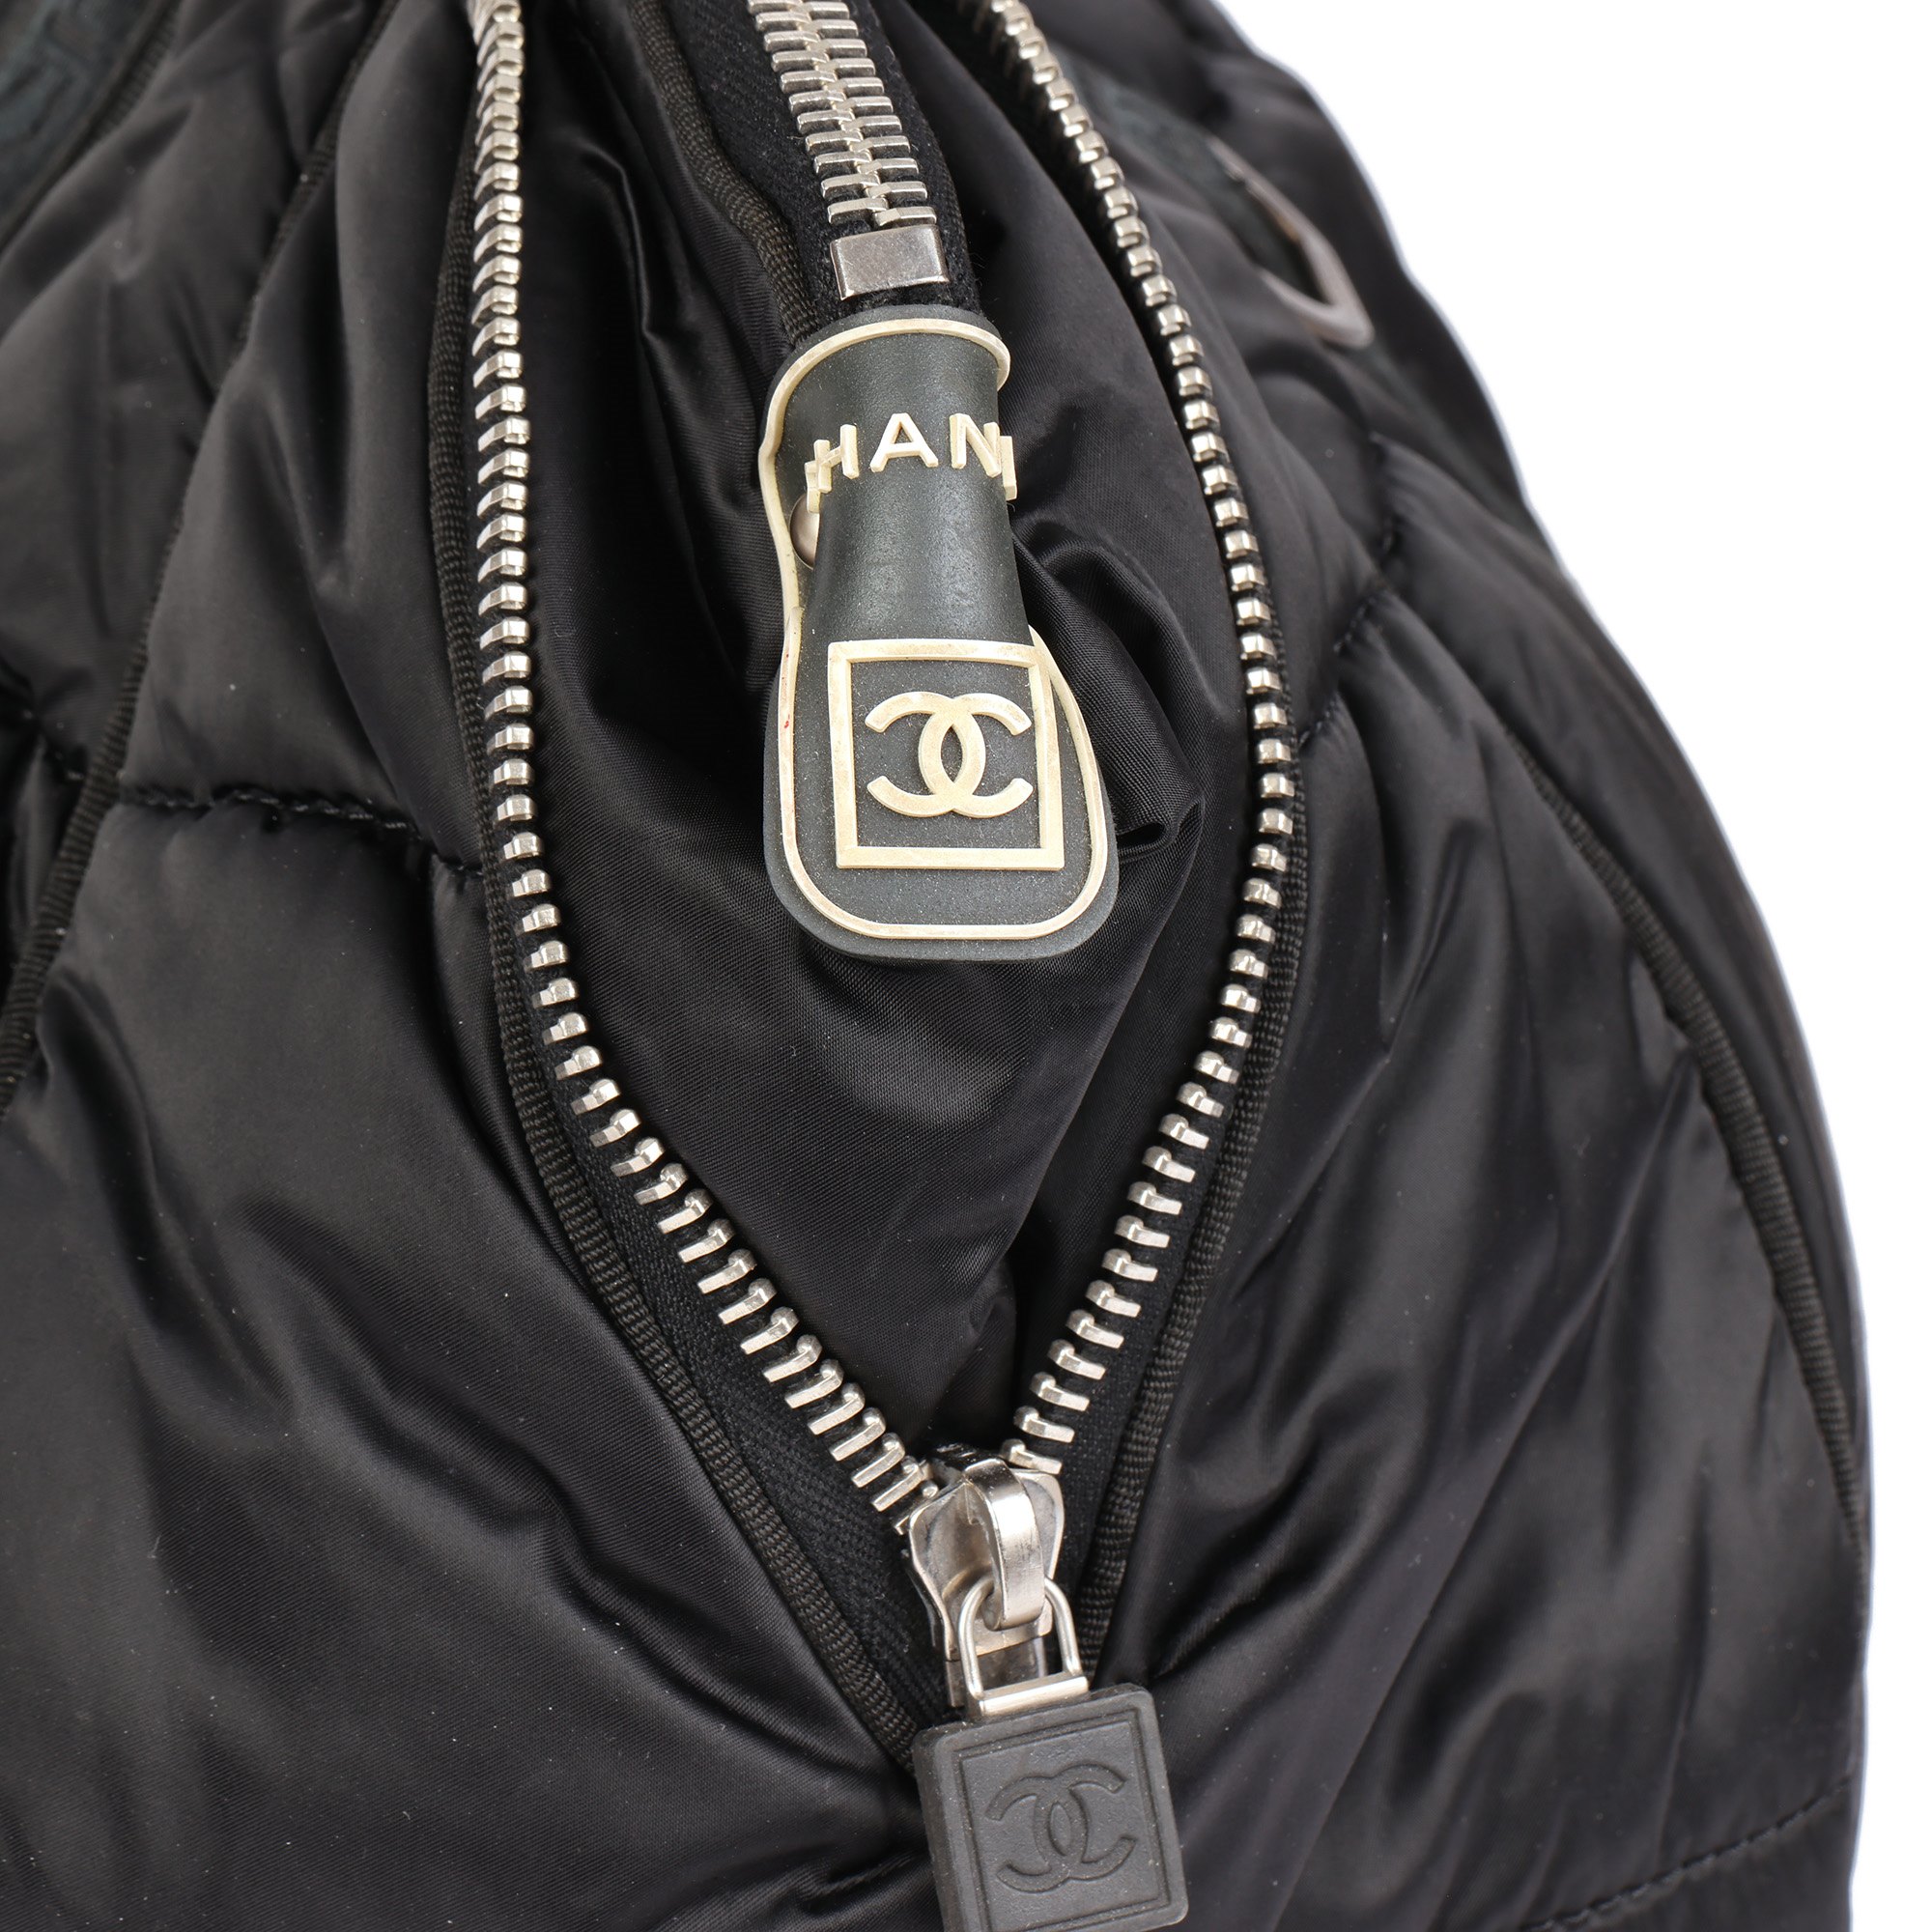 Chanel Black Quilted Nylon Coco Niege Sports Gym Tote